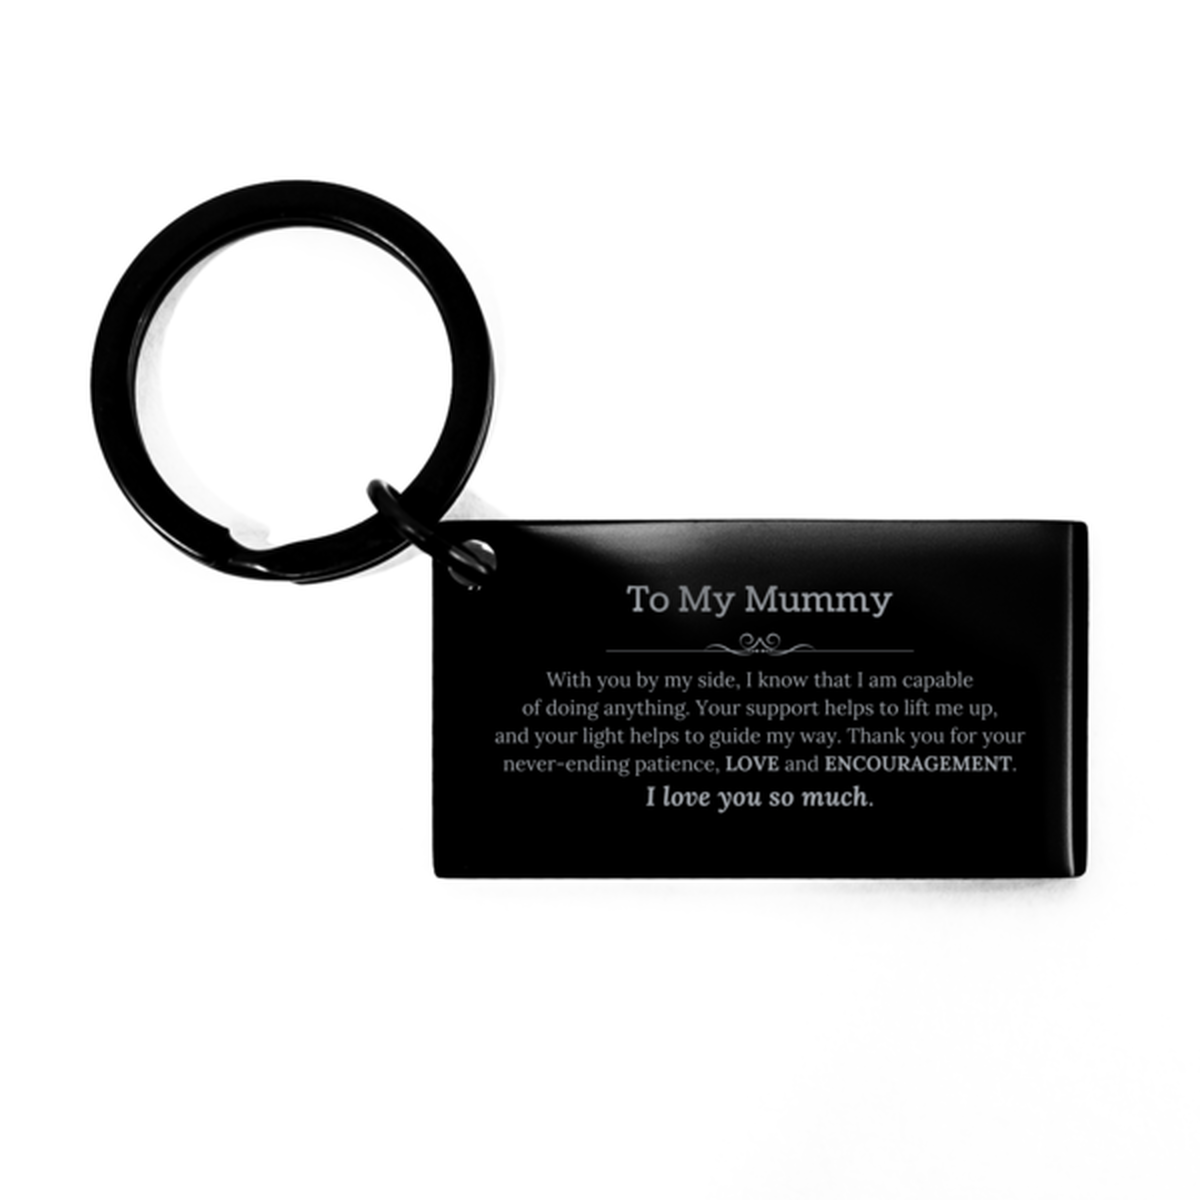 Appreciation Mummy Keychain Gifts, To My Mummy Birthday Christmas Wedding Keepsake Gifts for Mummy With you by my side, I know that I am capable of doing anything. I love you so much